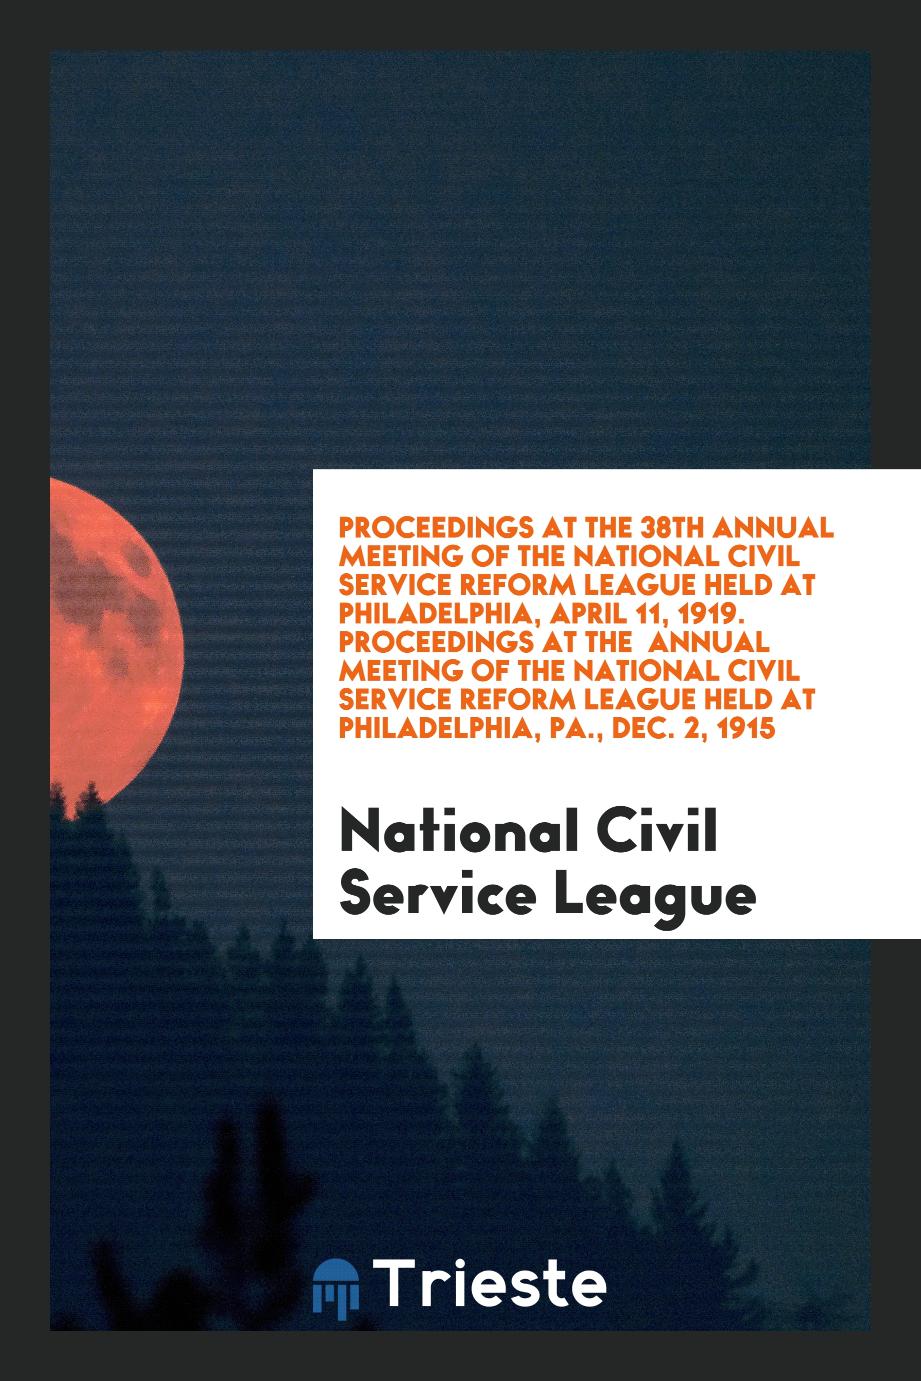 Proceedings at the 38th Annual Meeting of the National Civil Service Reform League Held at Philadelphia, April 11, 1919. Proceedings at the Annual Meeting of the National Civil Service Reform League Held at Philadelphia, PA., Dec. 2, 1915